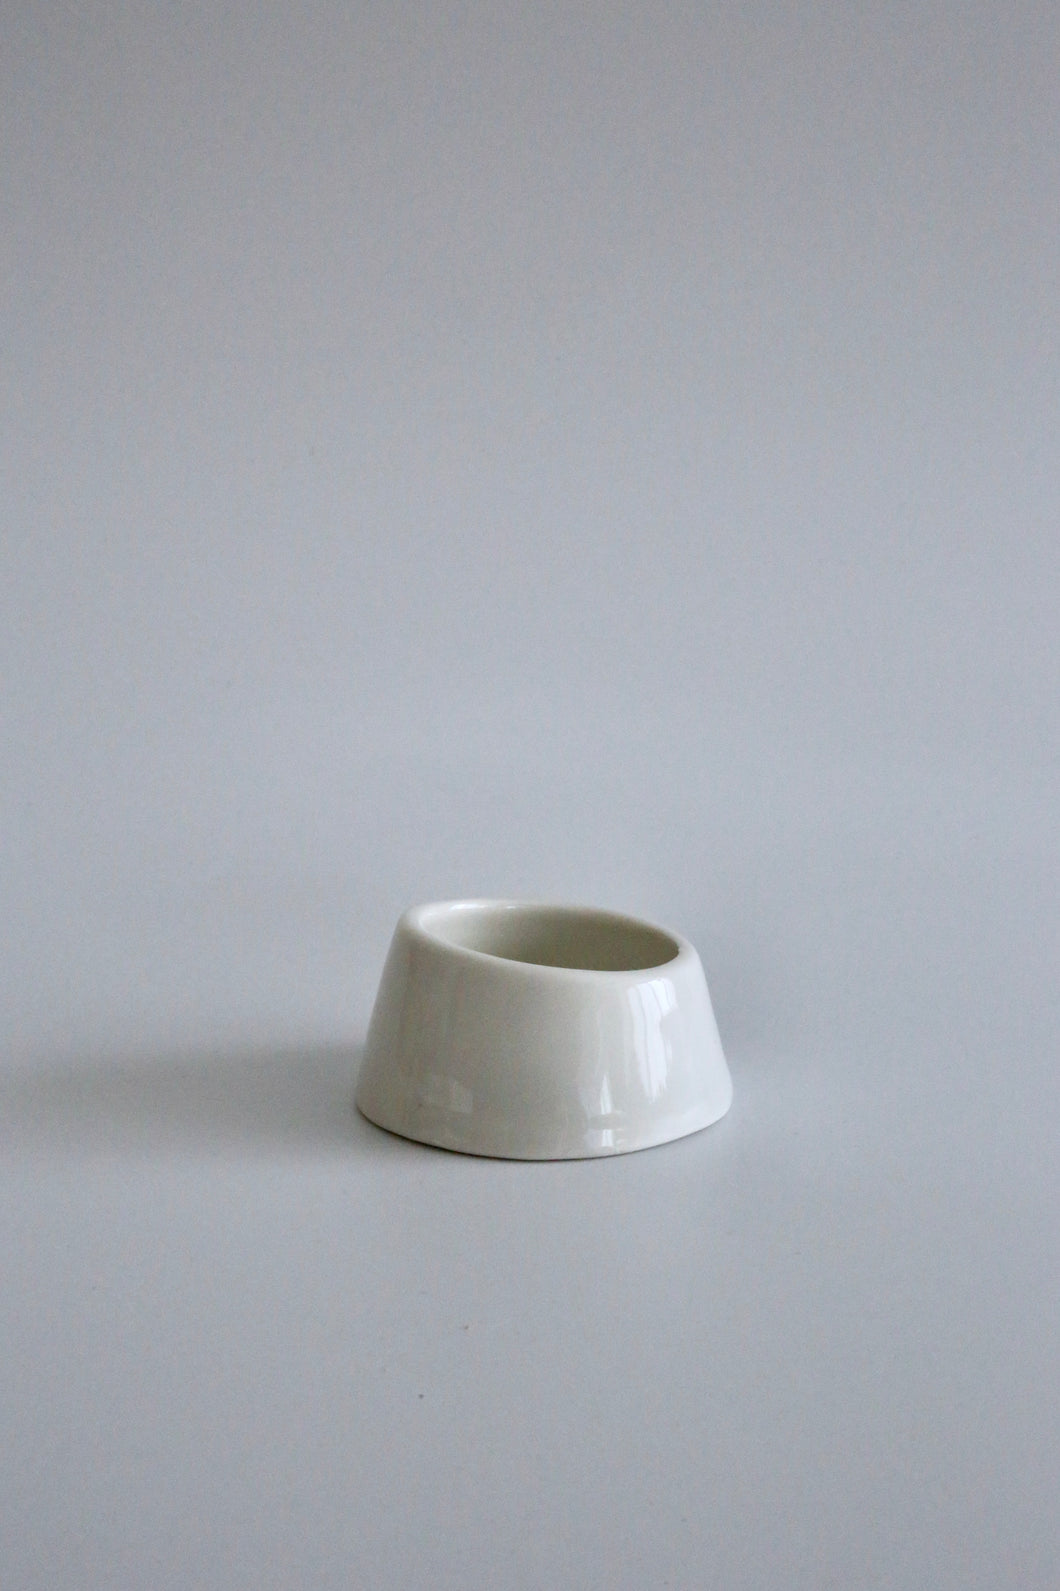 【ARC objects】Everything vessel